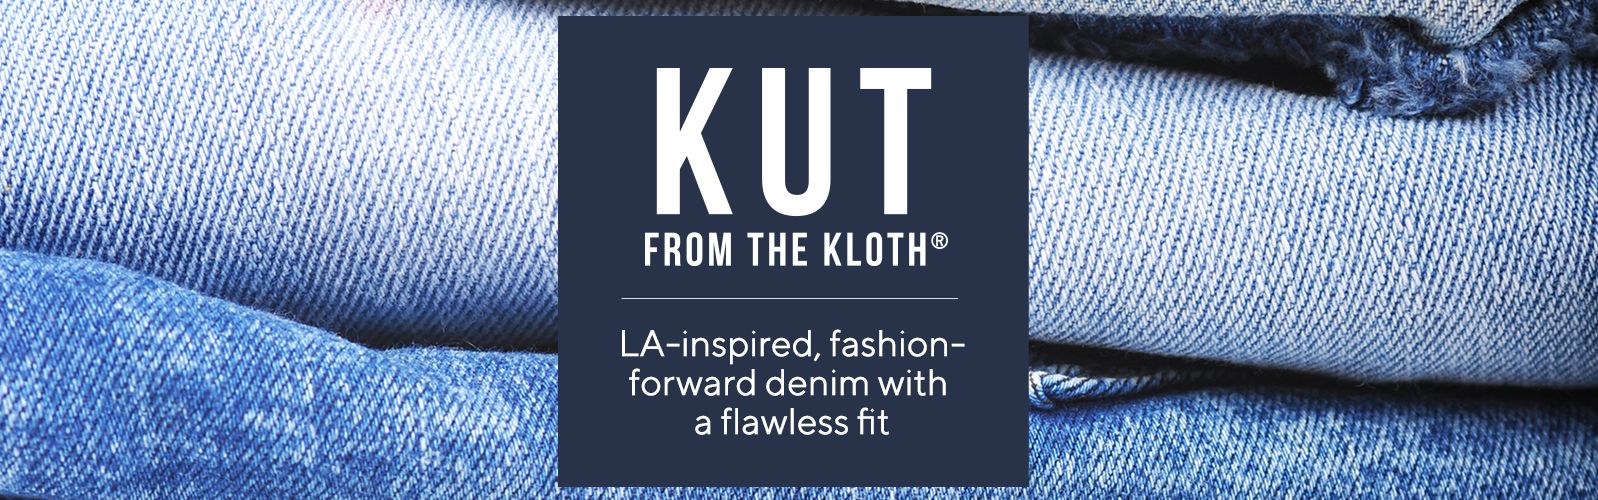 kut from the kloth brand